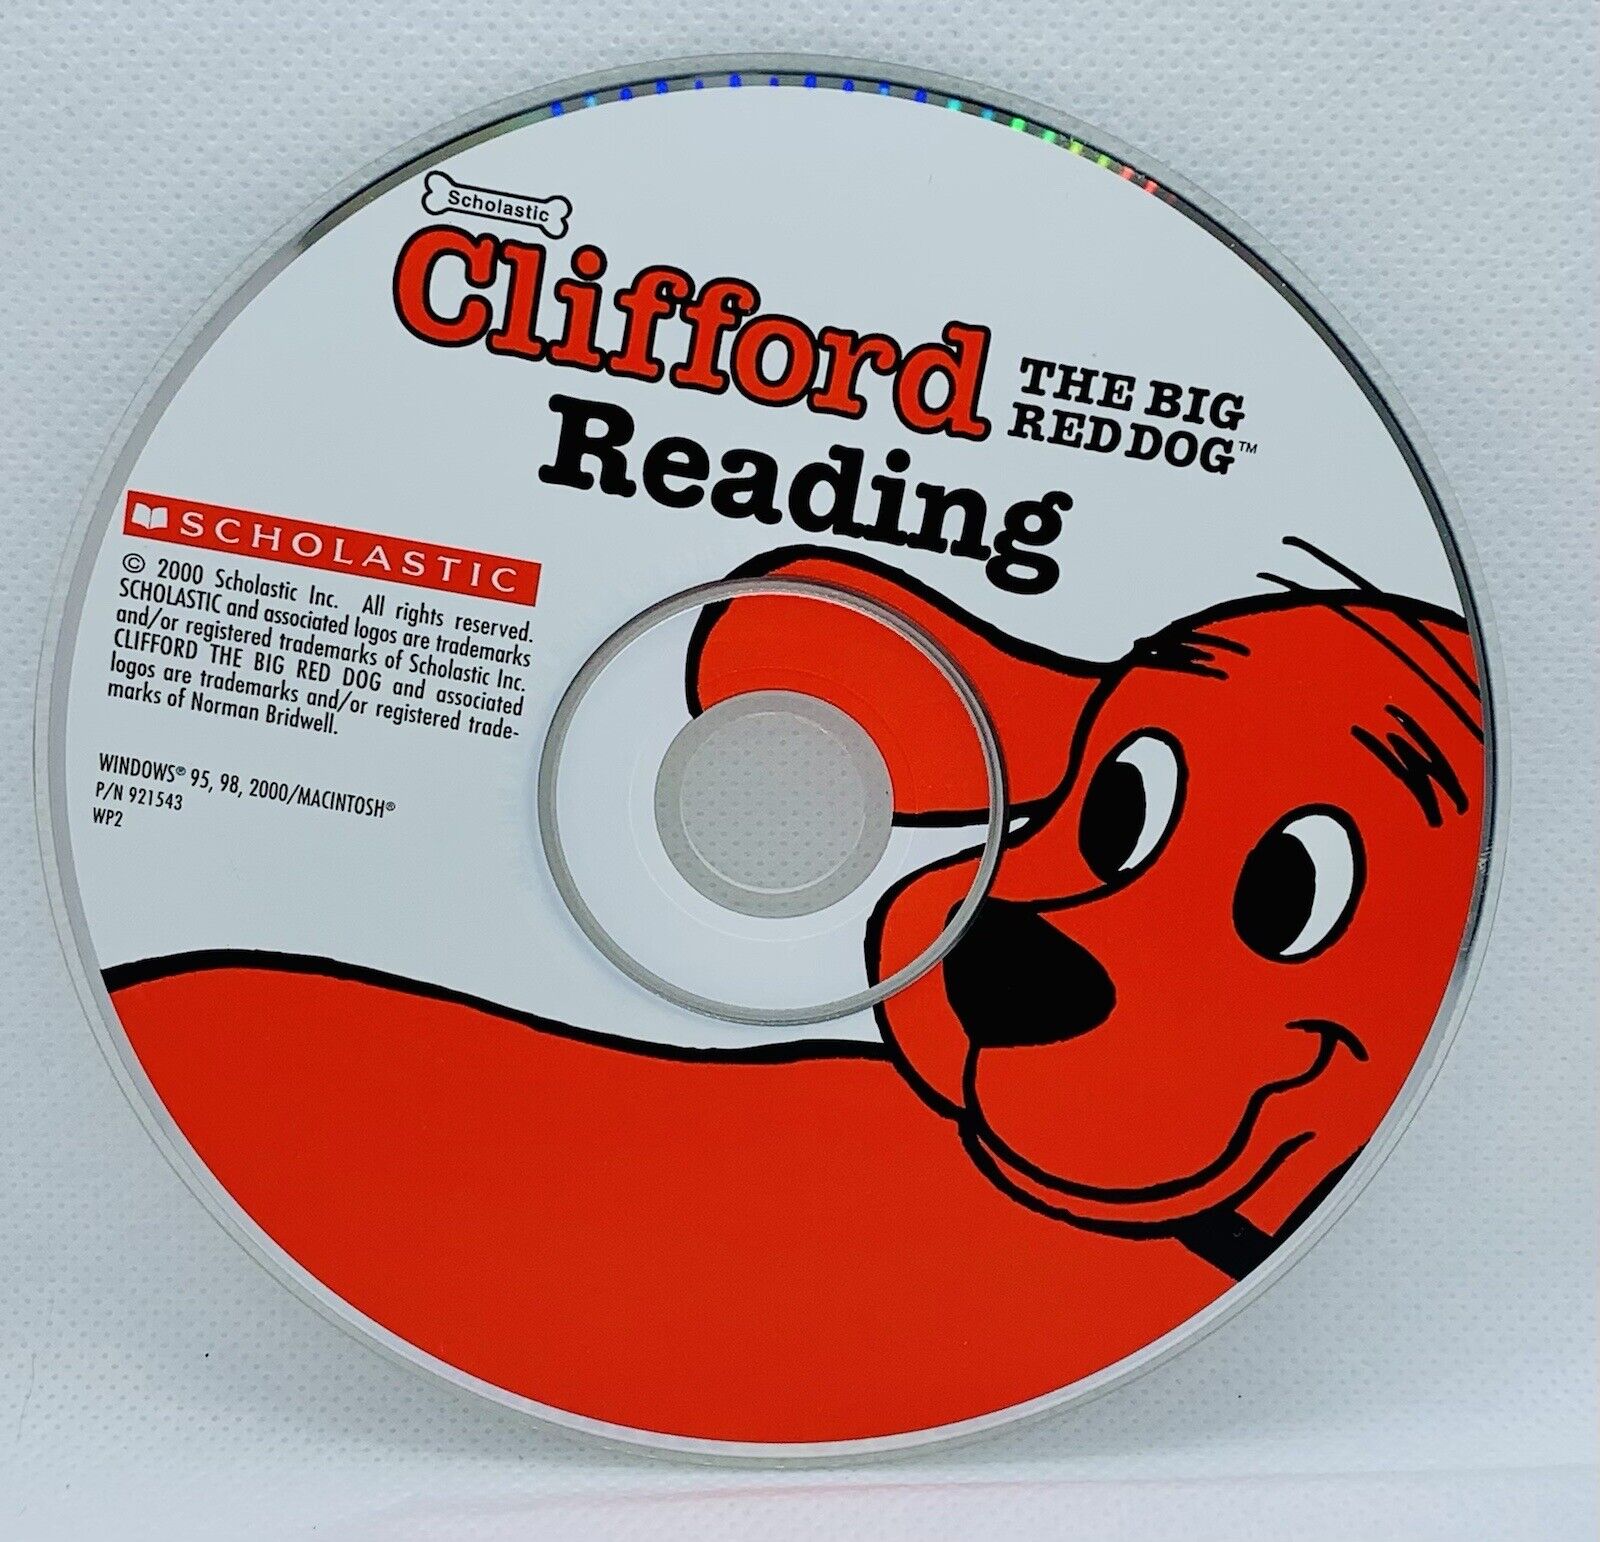 CLIFFORD THE BIG RED DOG READING 2000 PC Game Learning Interactive Windows/Mac eBay